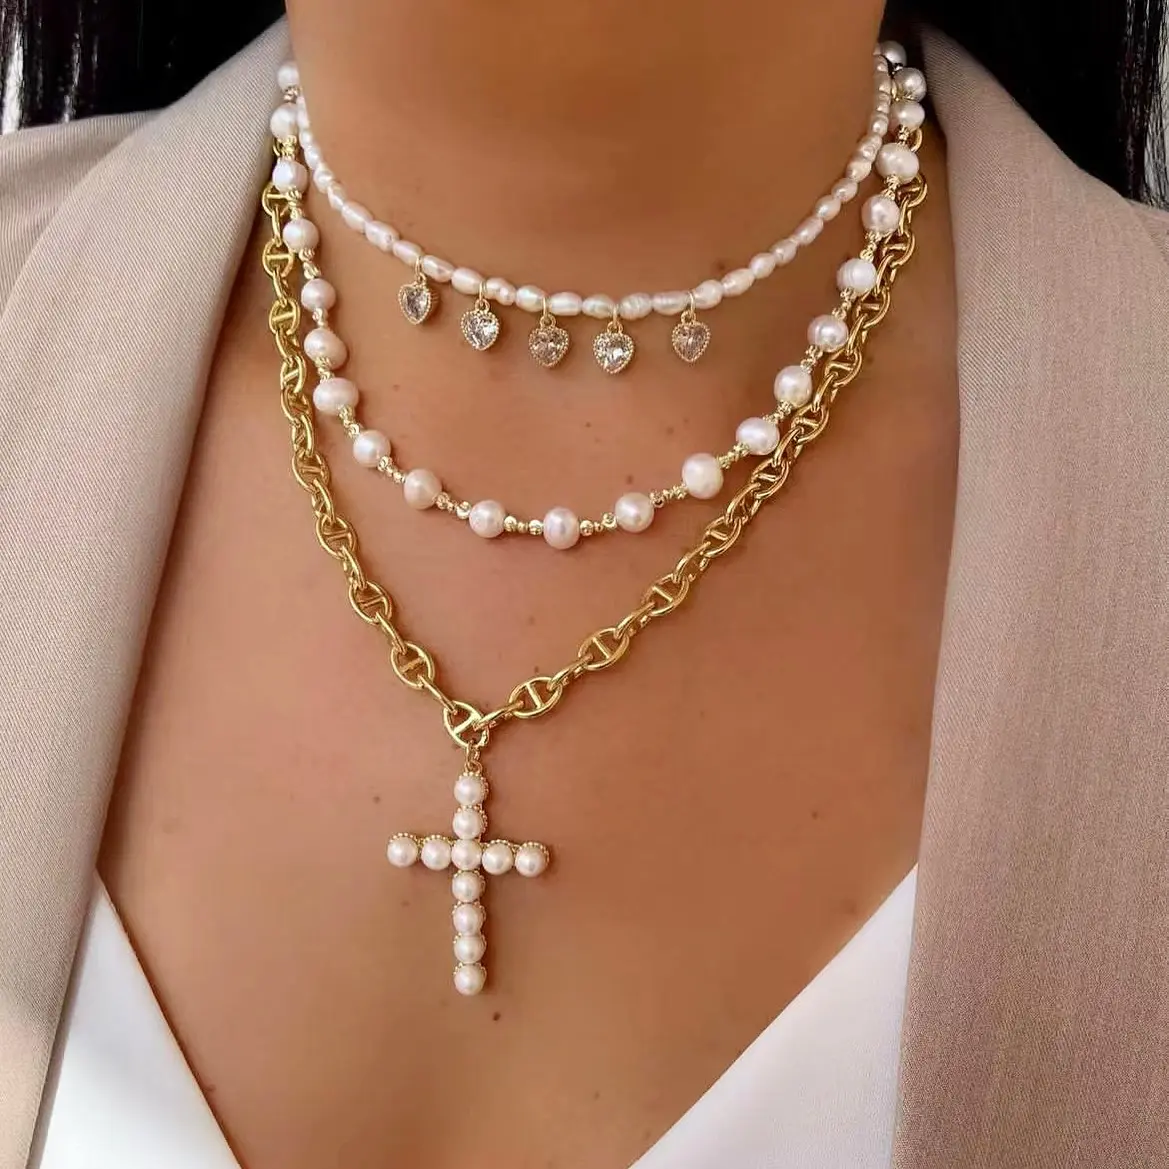 Luck Freshwater Pearl Jewelry Necklace Set Copper Chain Hiphop Cross Women for Wholesale necklace Heart Pendant Fashion Wedding